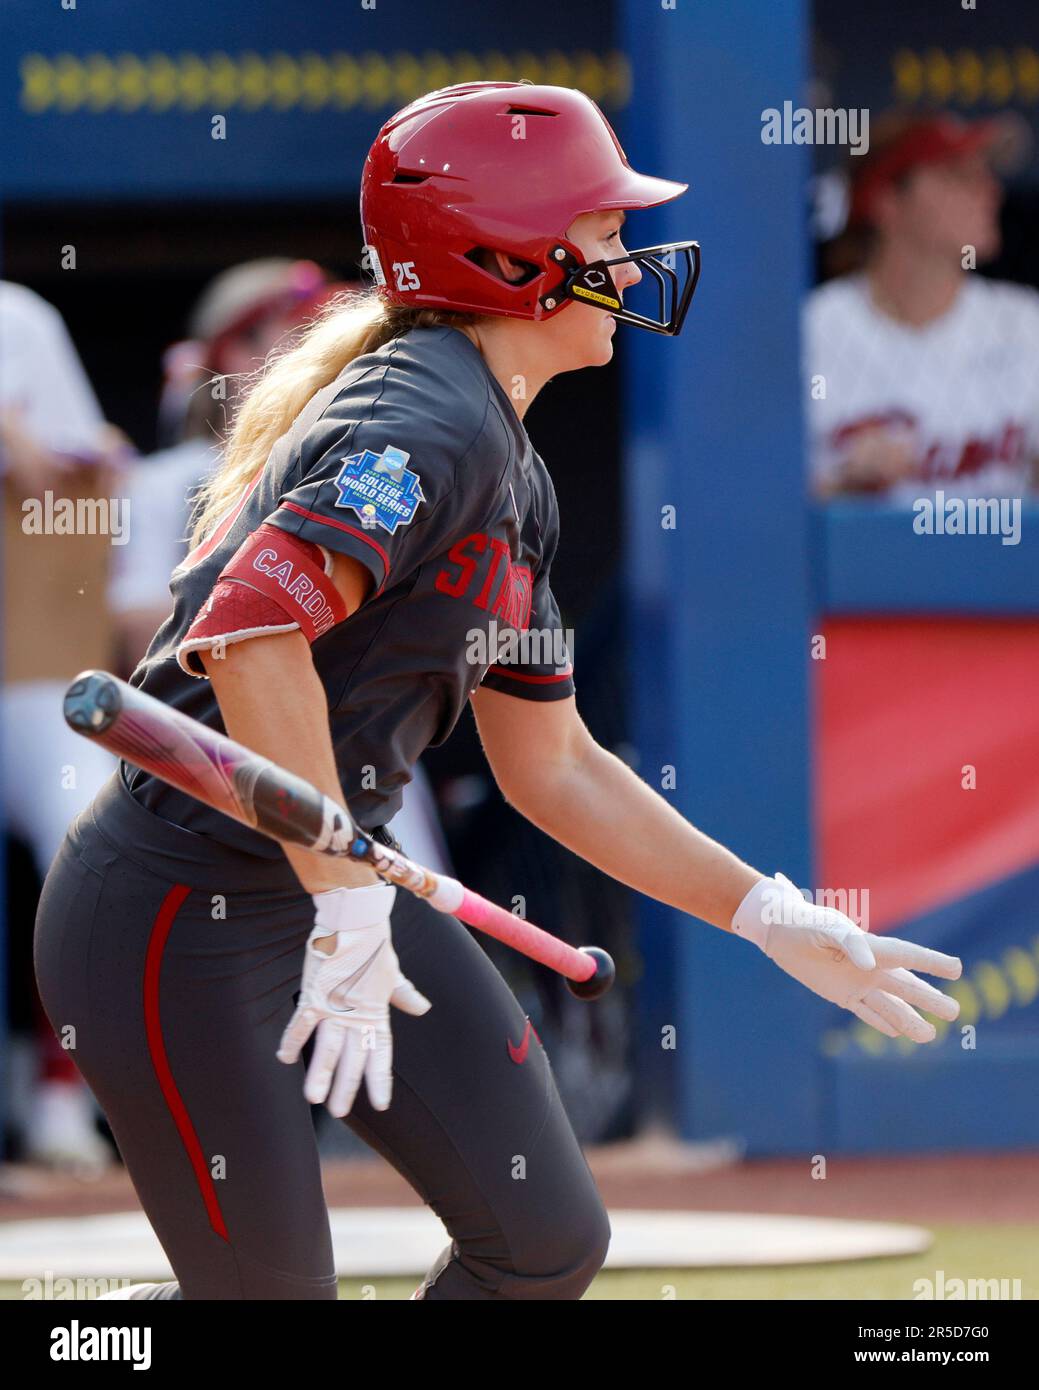 Stanford's Taylor Gindlesperger drops her bat after hitting a double ...